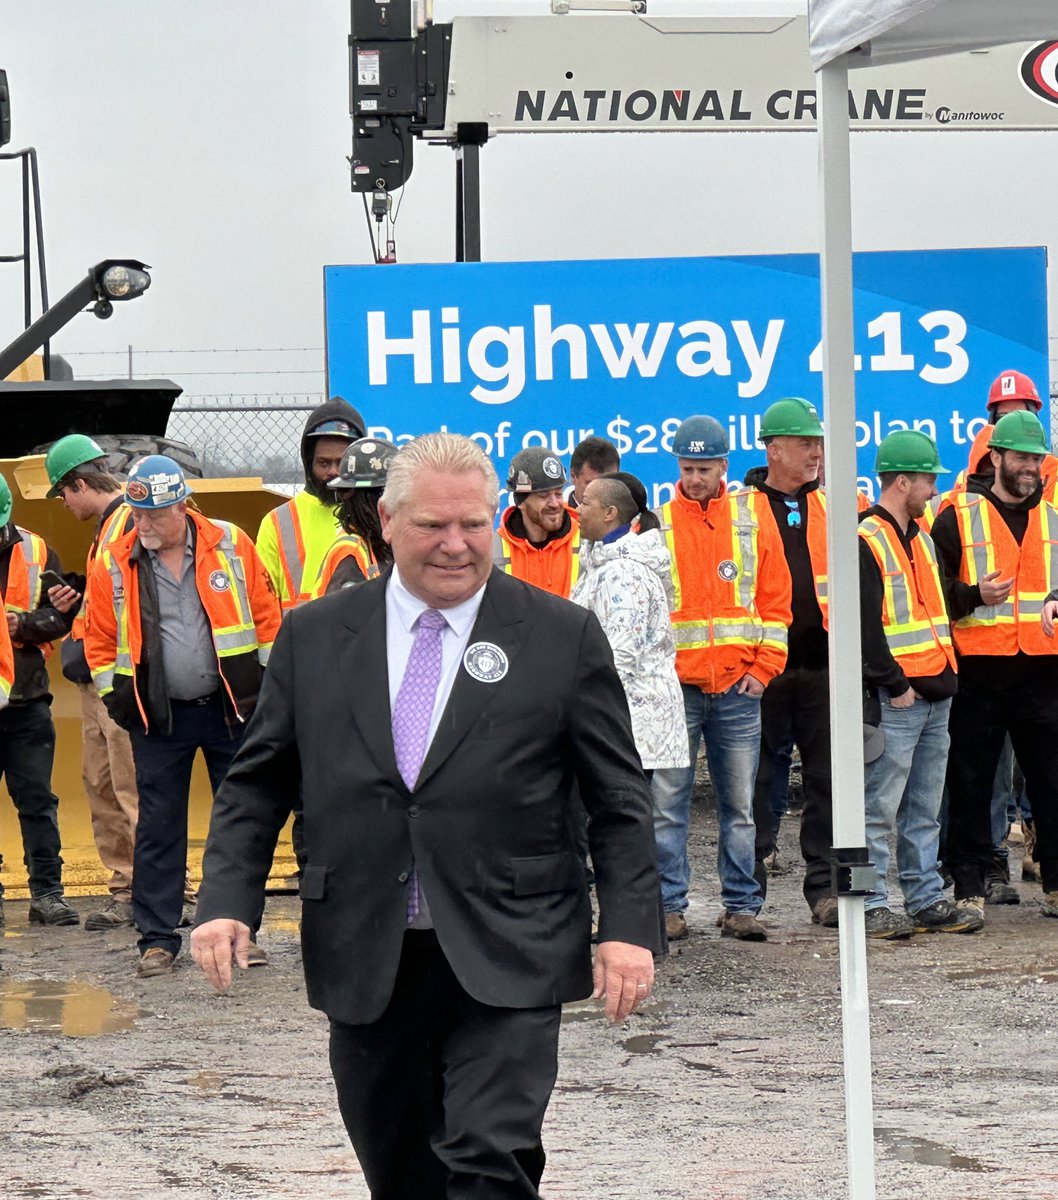 Ontario finally moving ahead with #Hwy413. Construction to begin in 2025 and will create thousands of high-paying jobs. #prosperitycorridor #fixgridlock